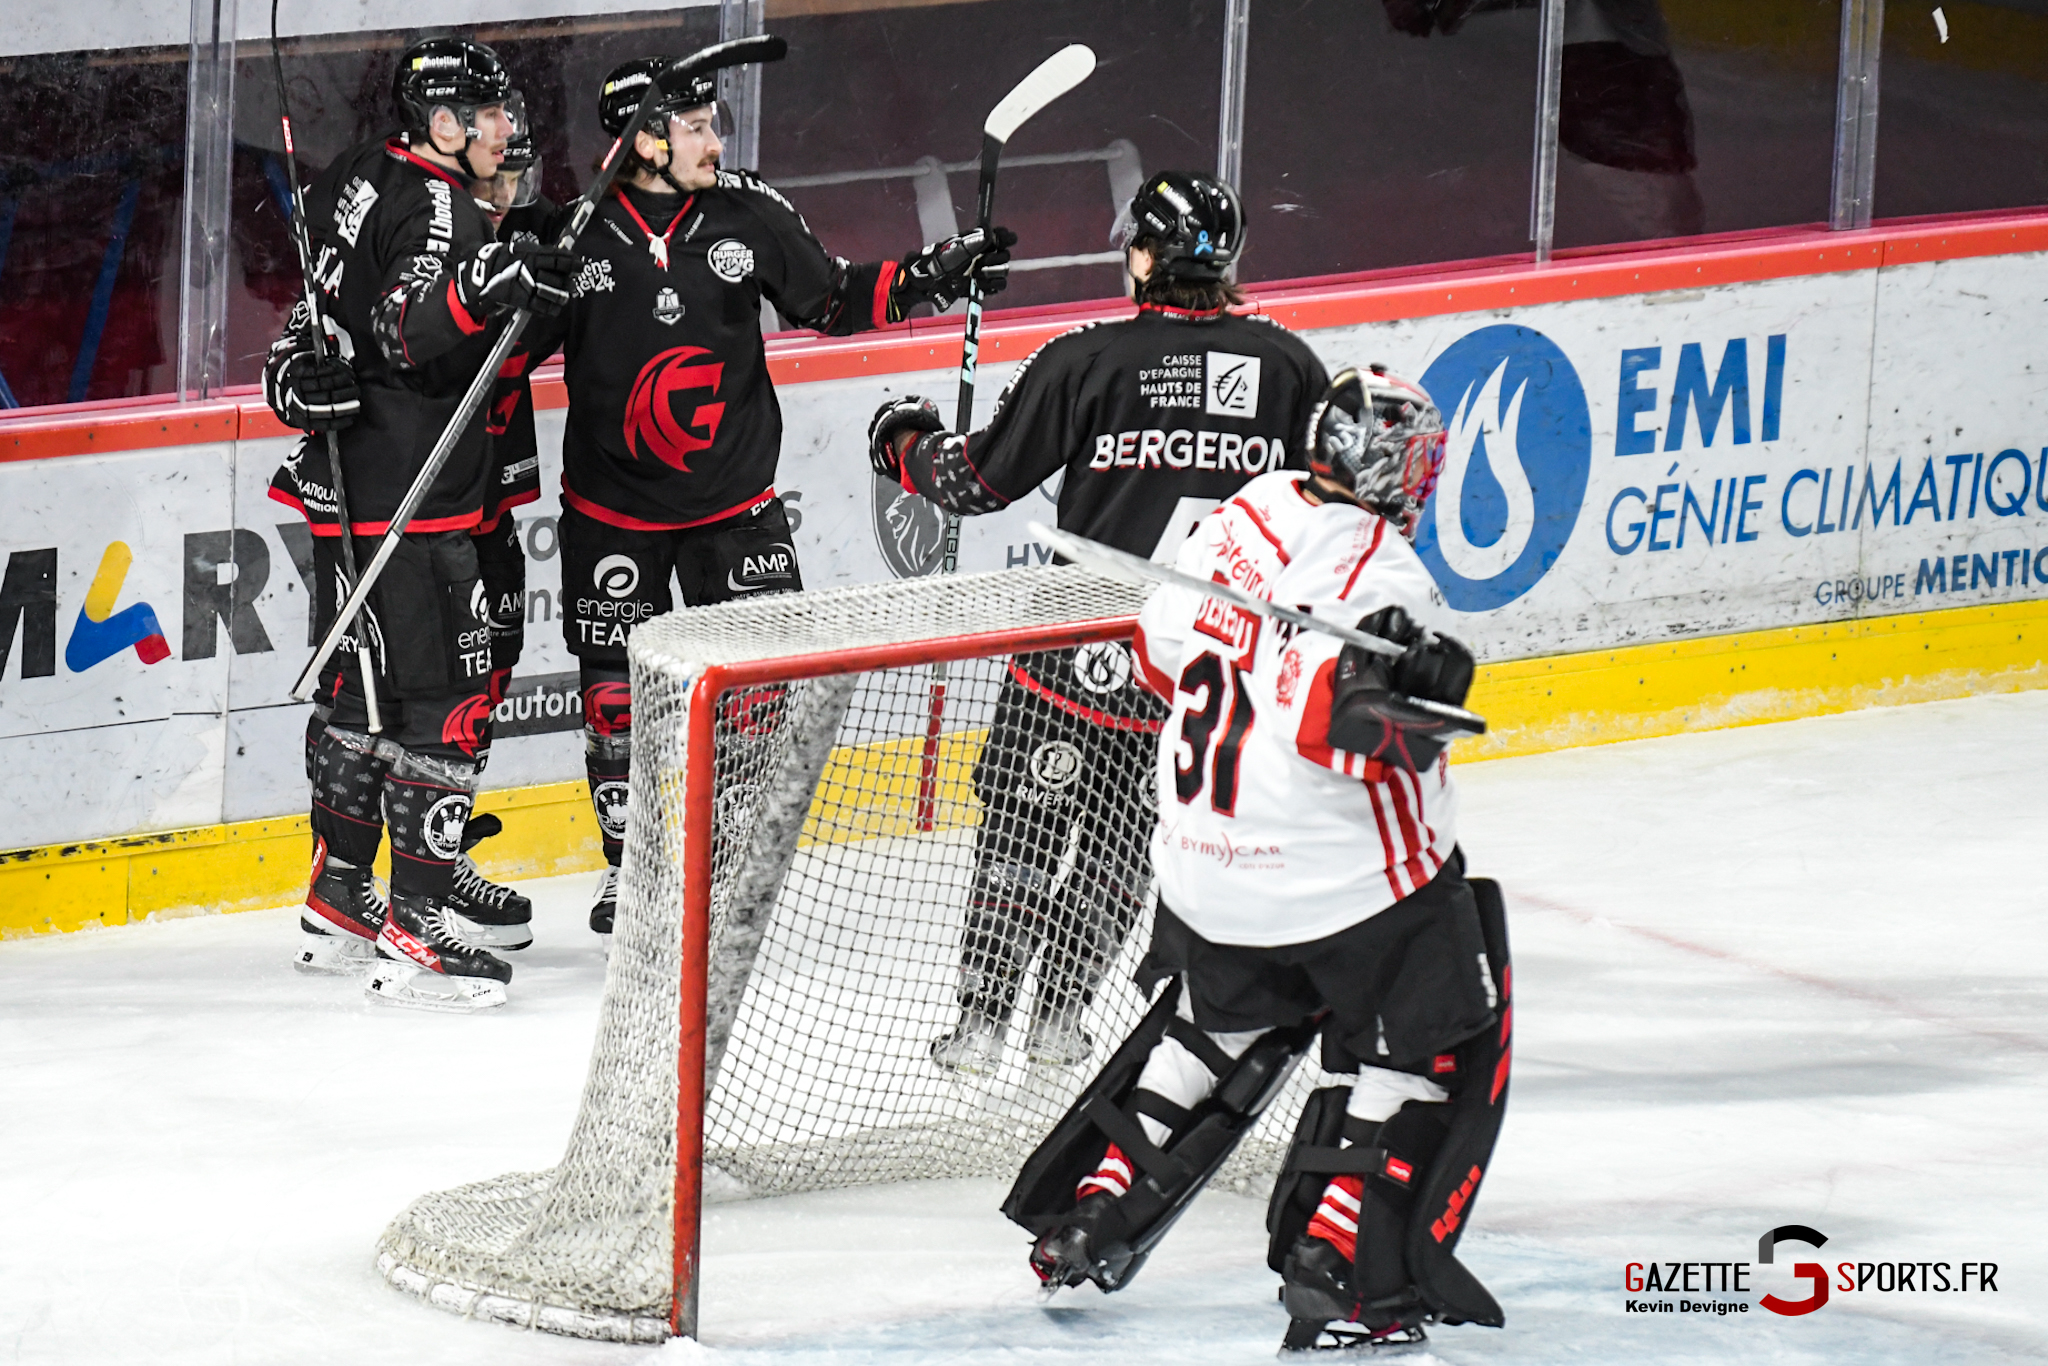 ICE HOCKEY – Coupe de France: Amiens crushes Nice and reaches the final four – GazetteSports